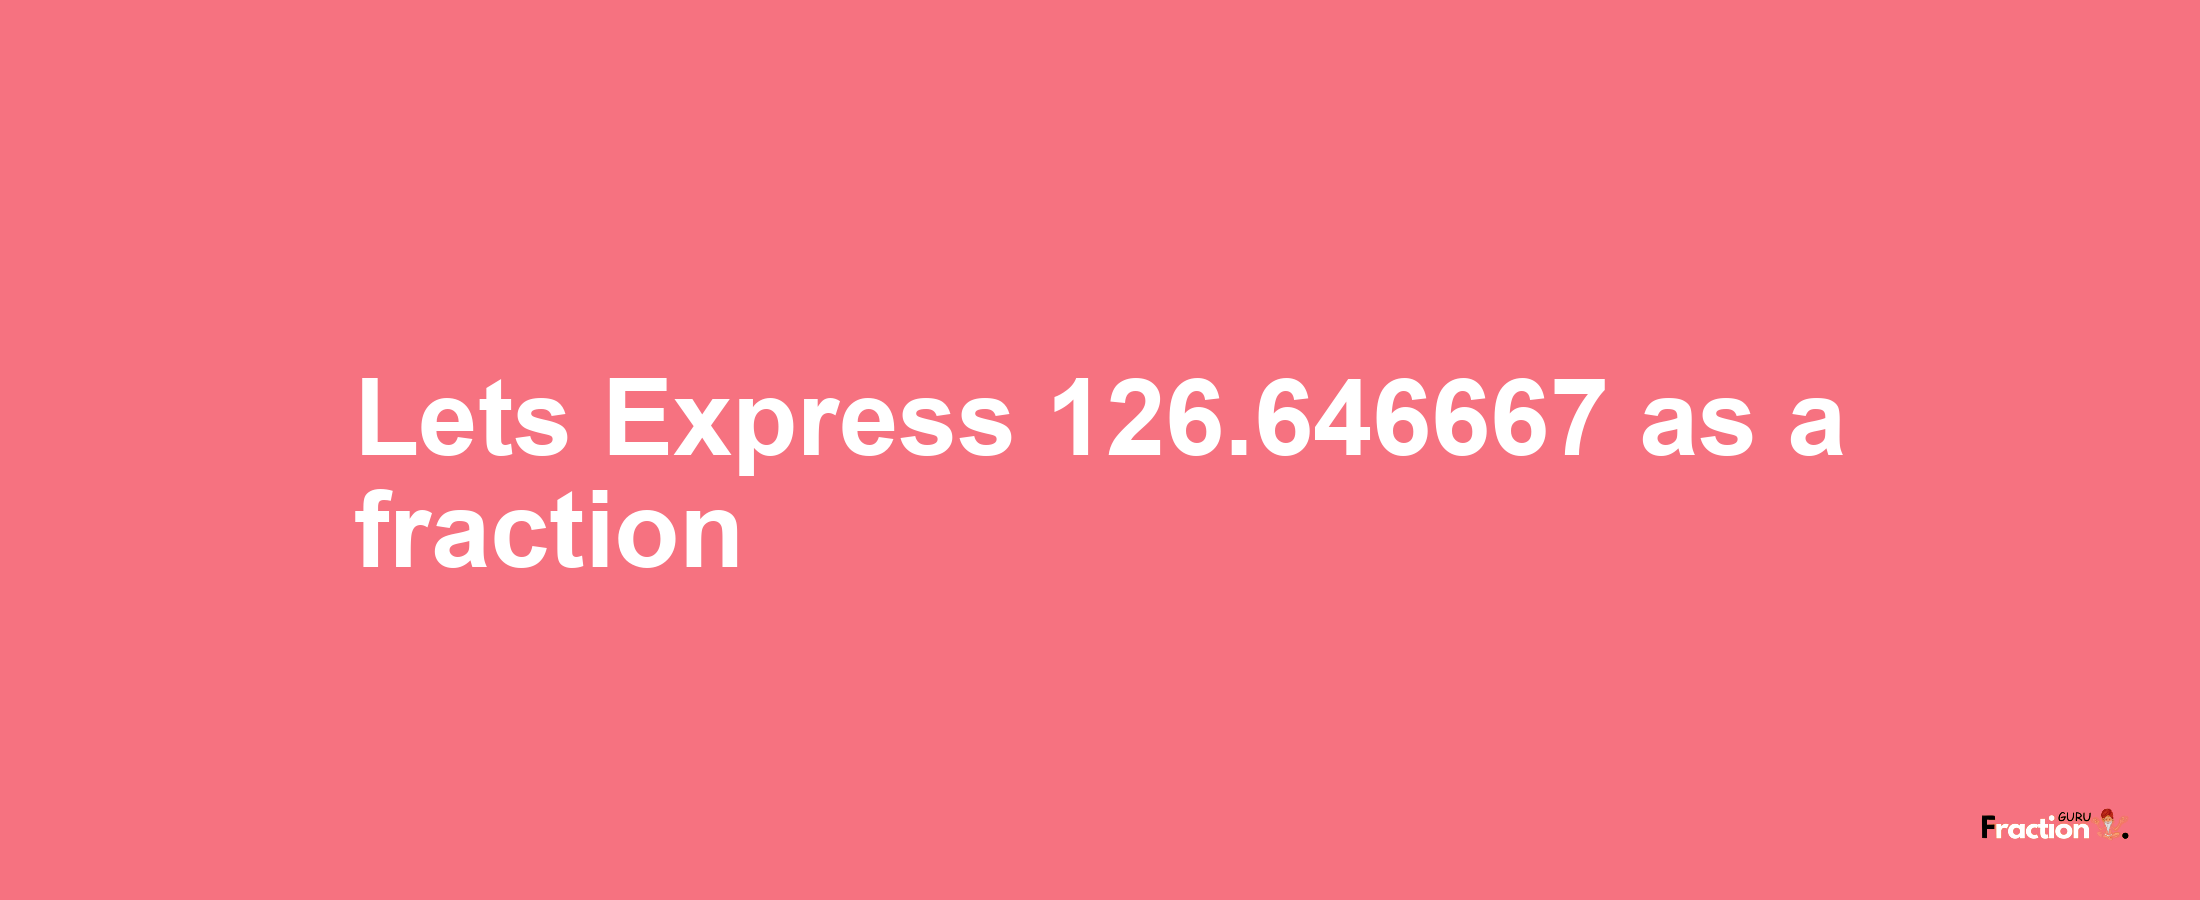 Lets Express 126.646667 as afraction